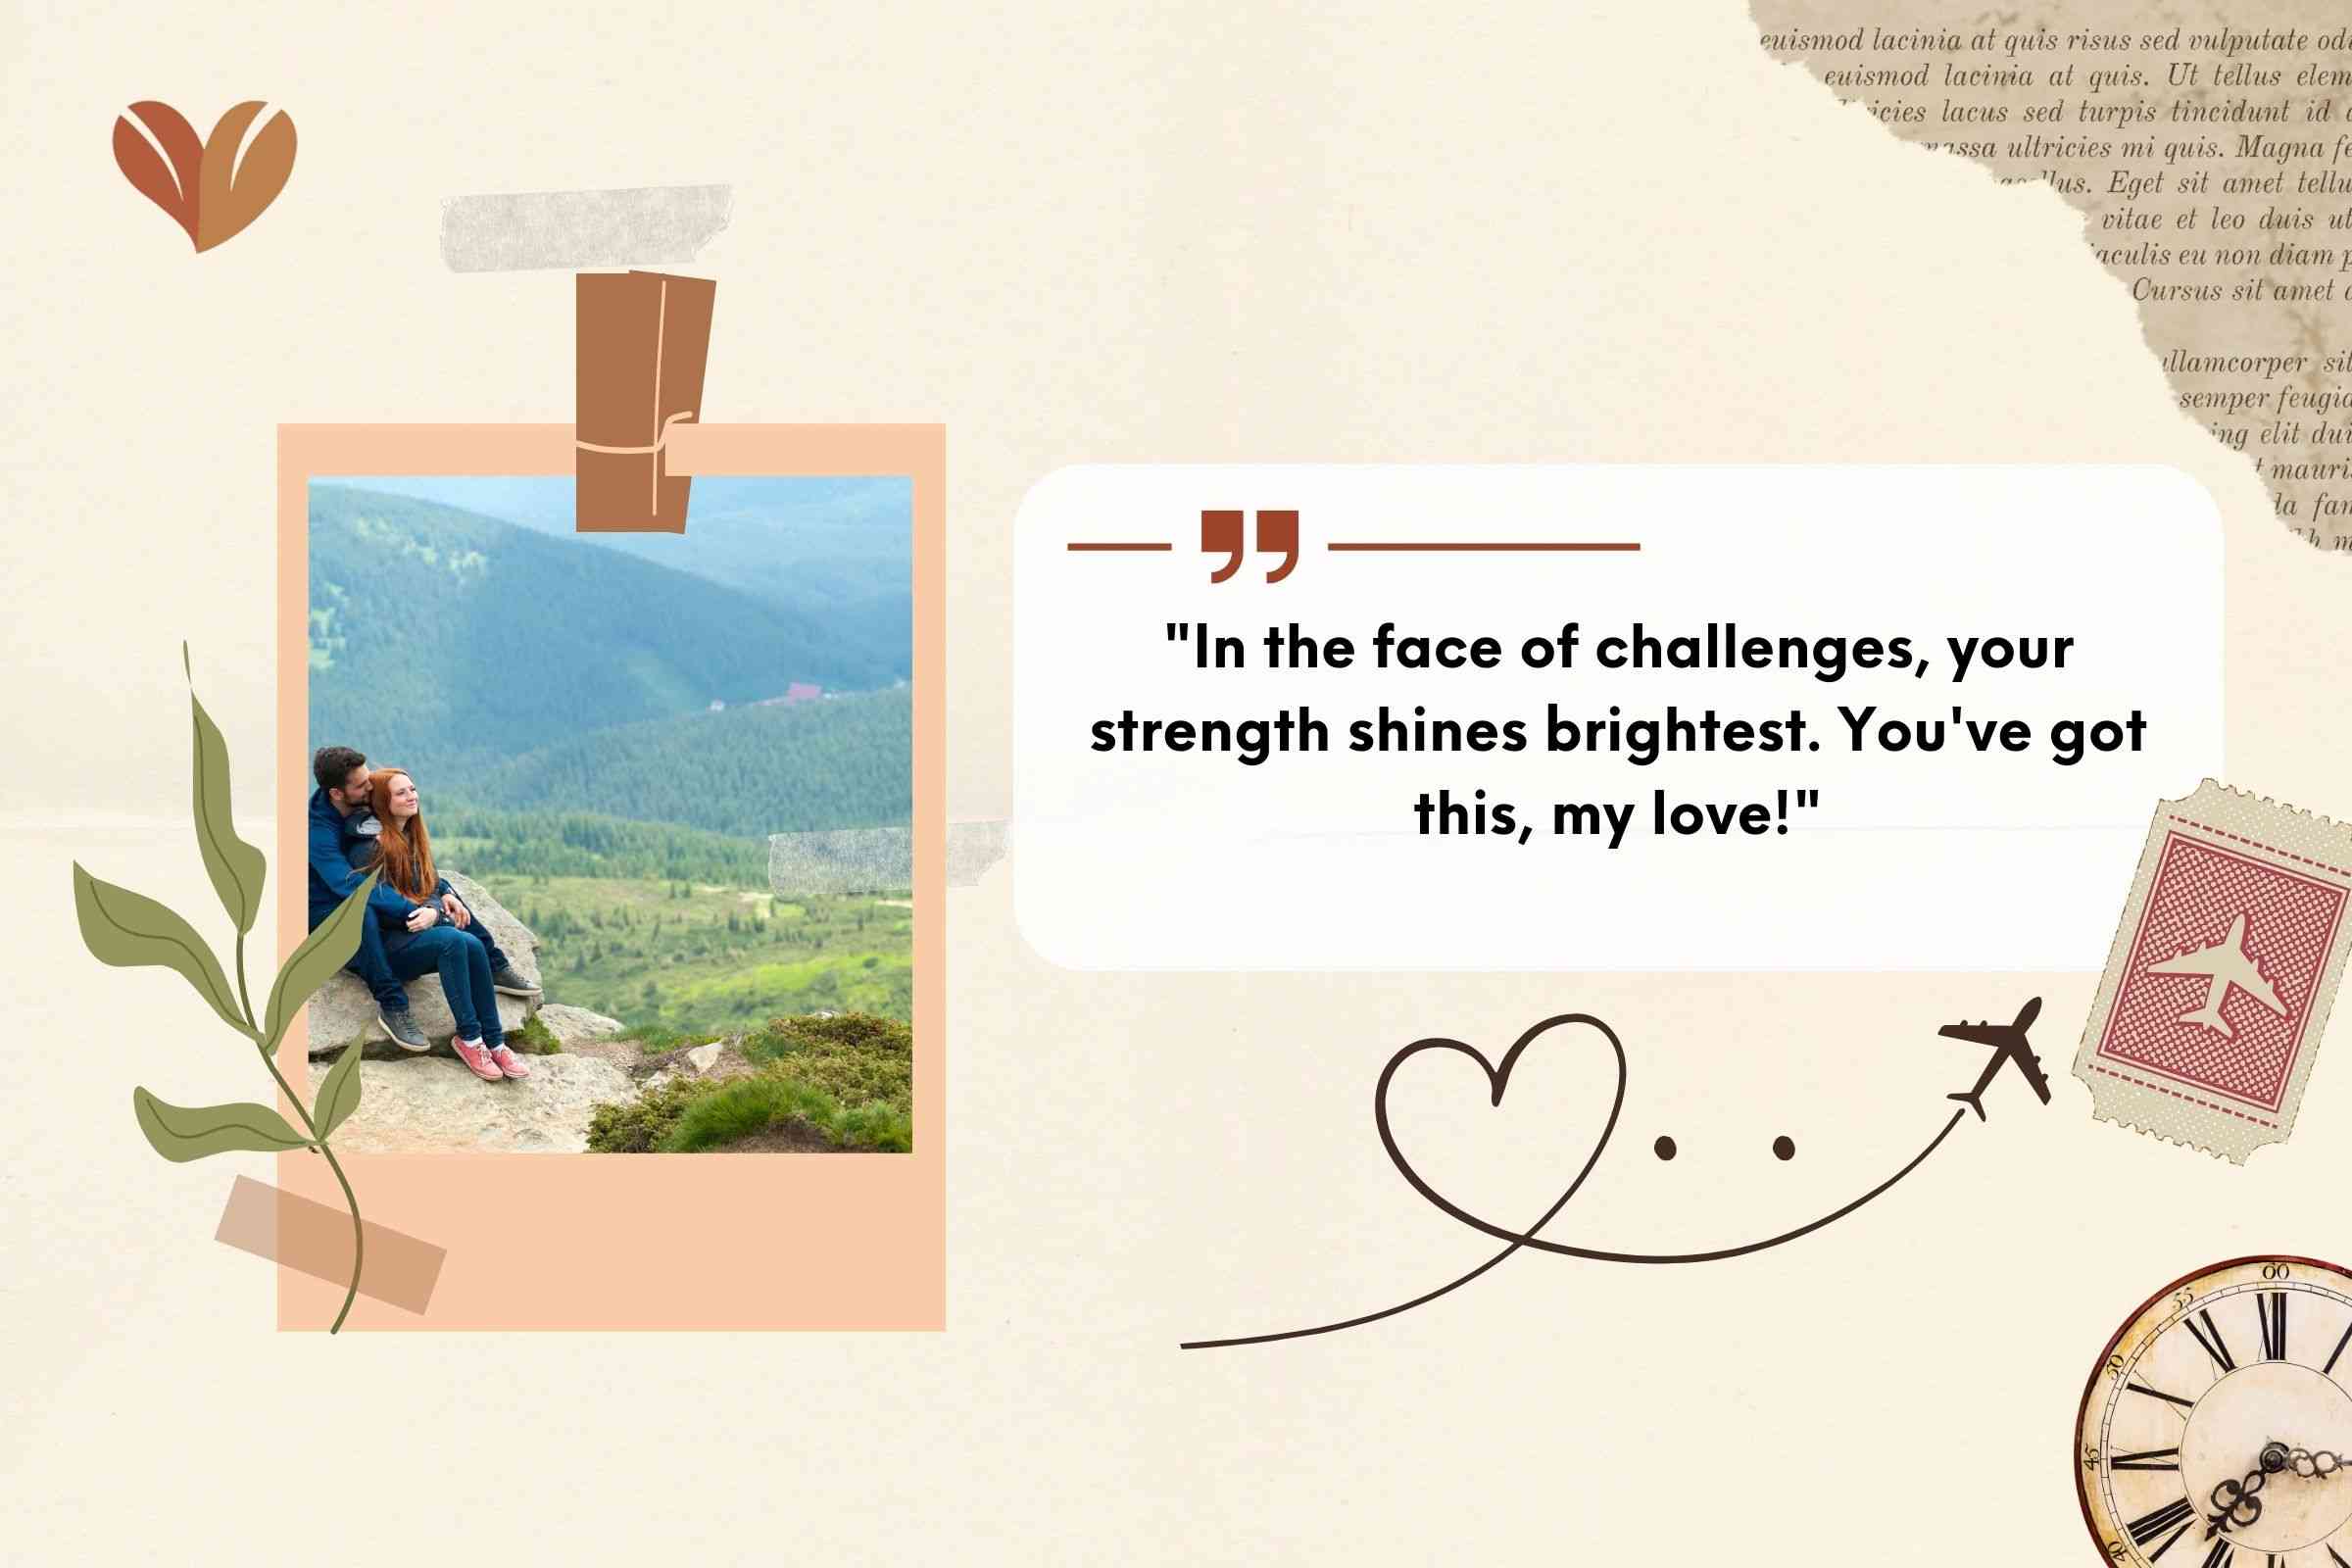 "In the face of challenges, your strength shines brightest. You've got this, my love!"